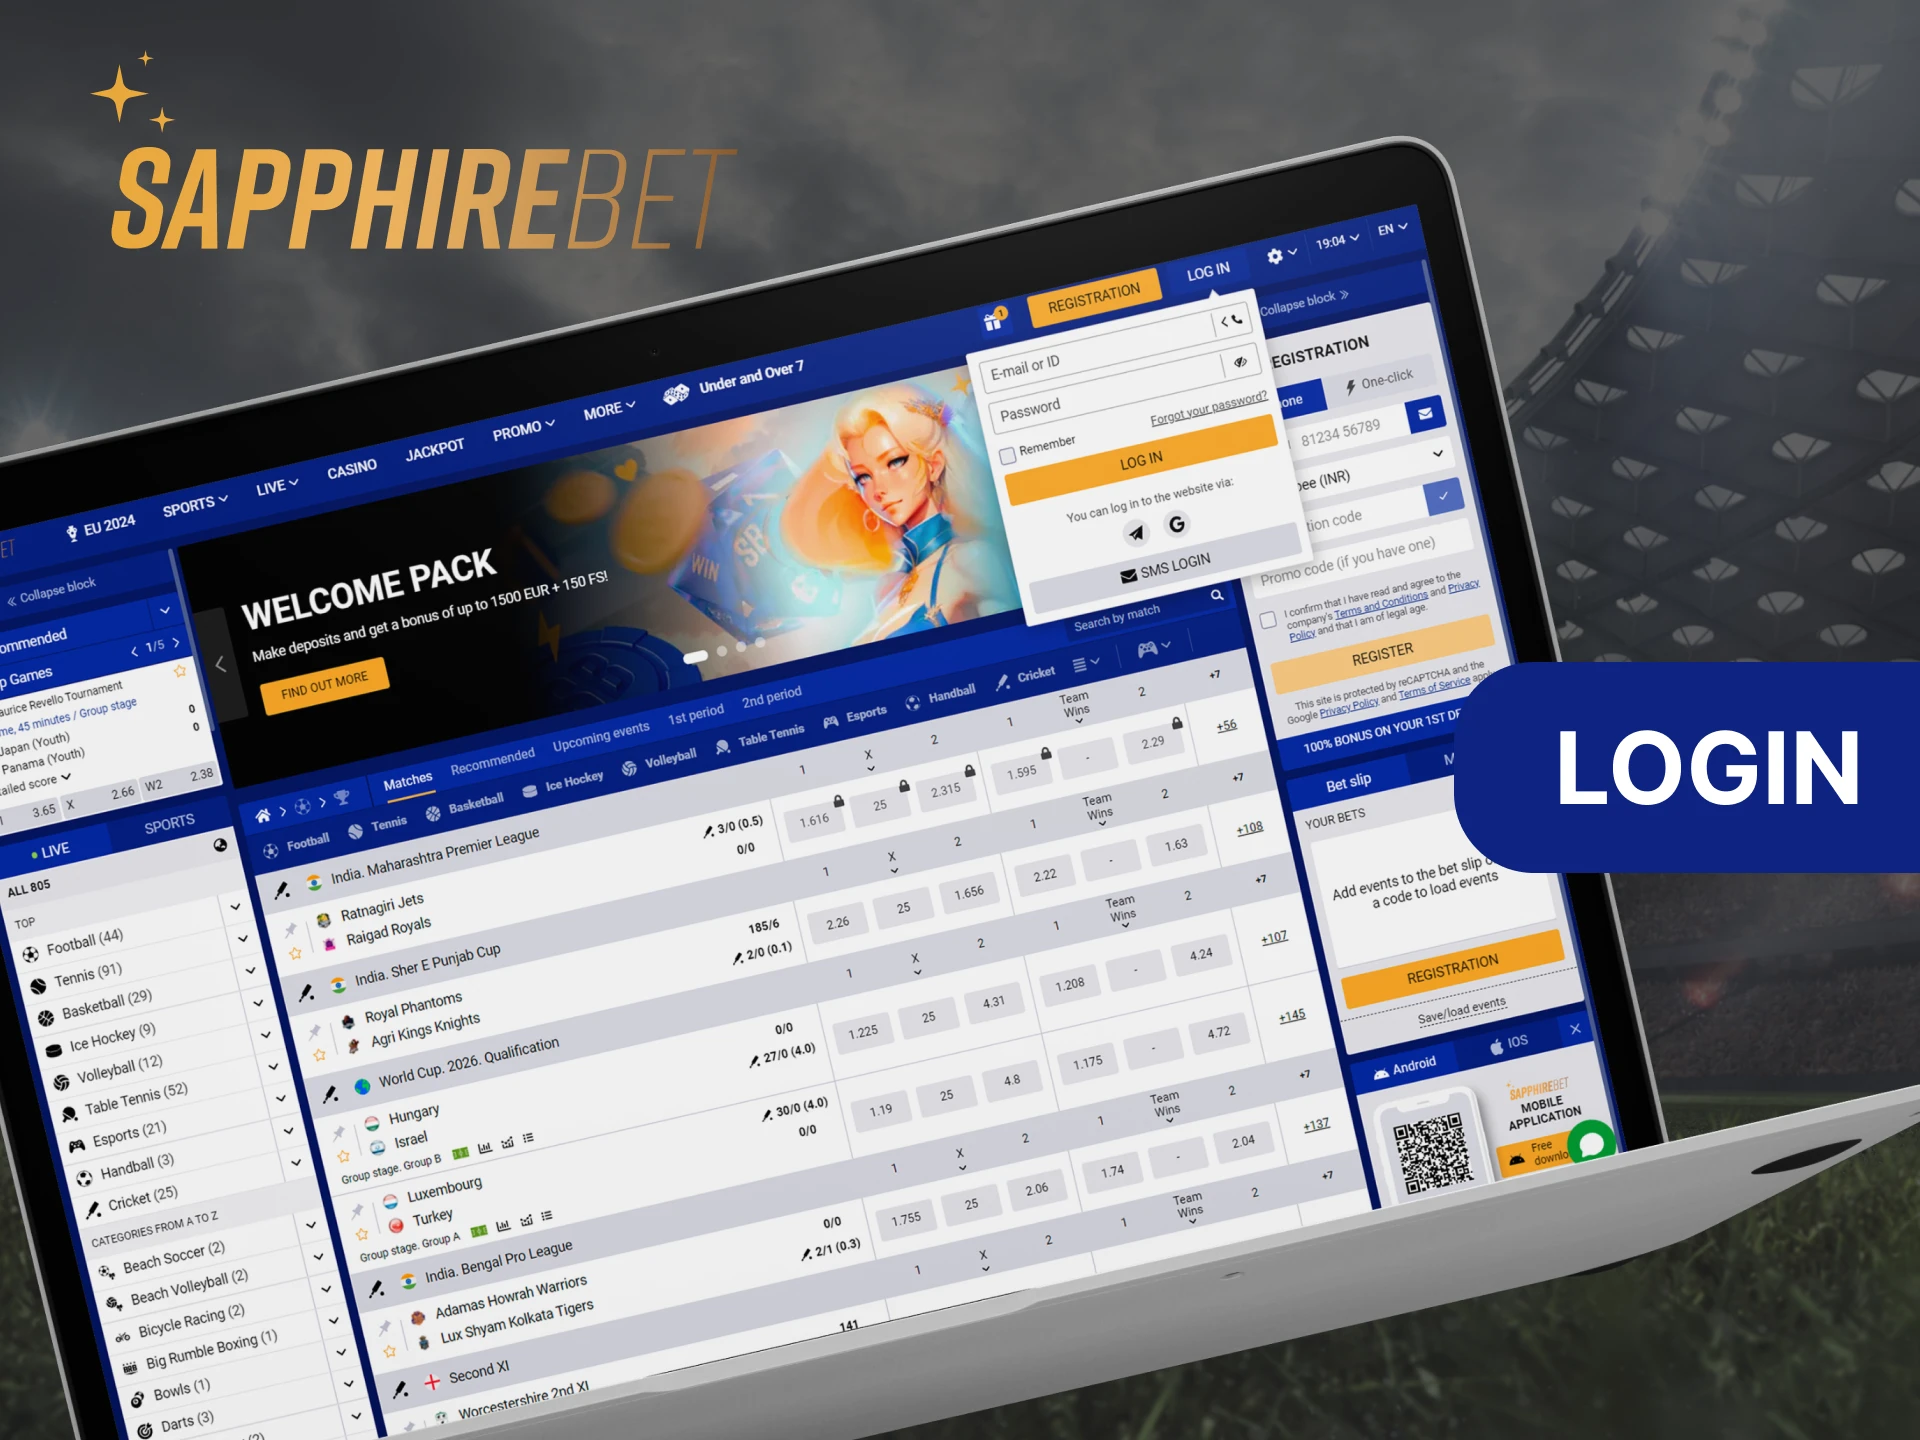 You do not need to create a new account on Sapphirebet if you already have an existing account.